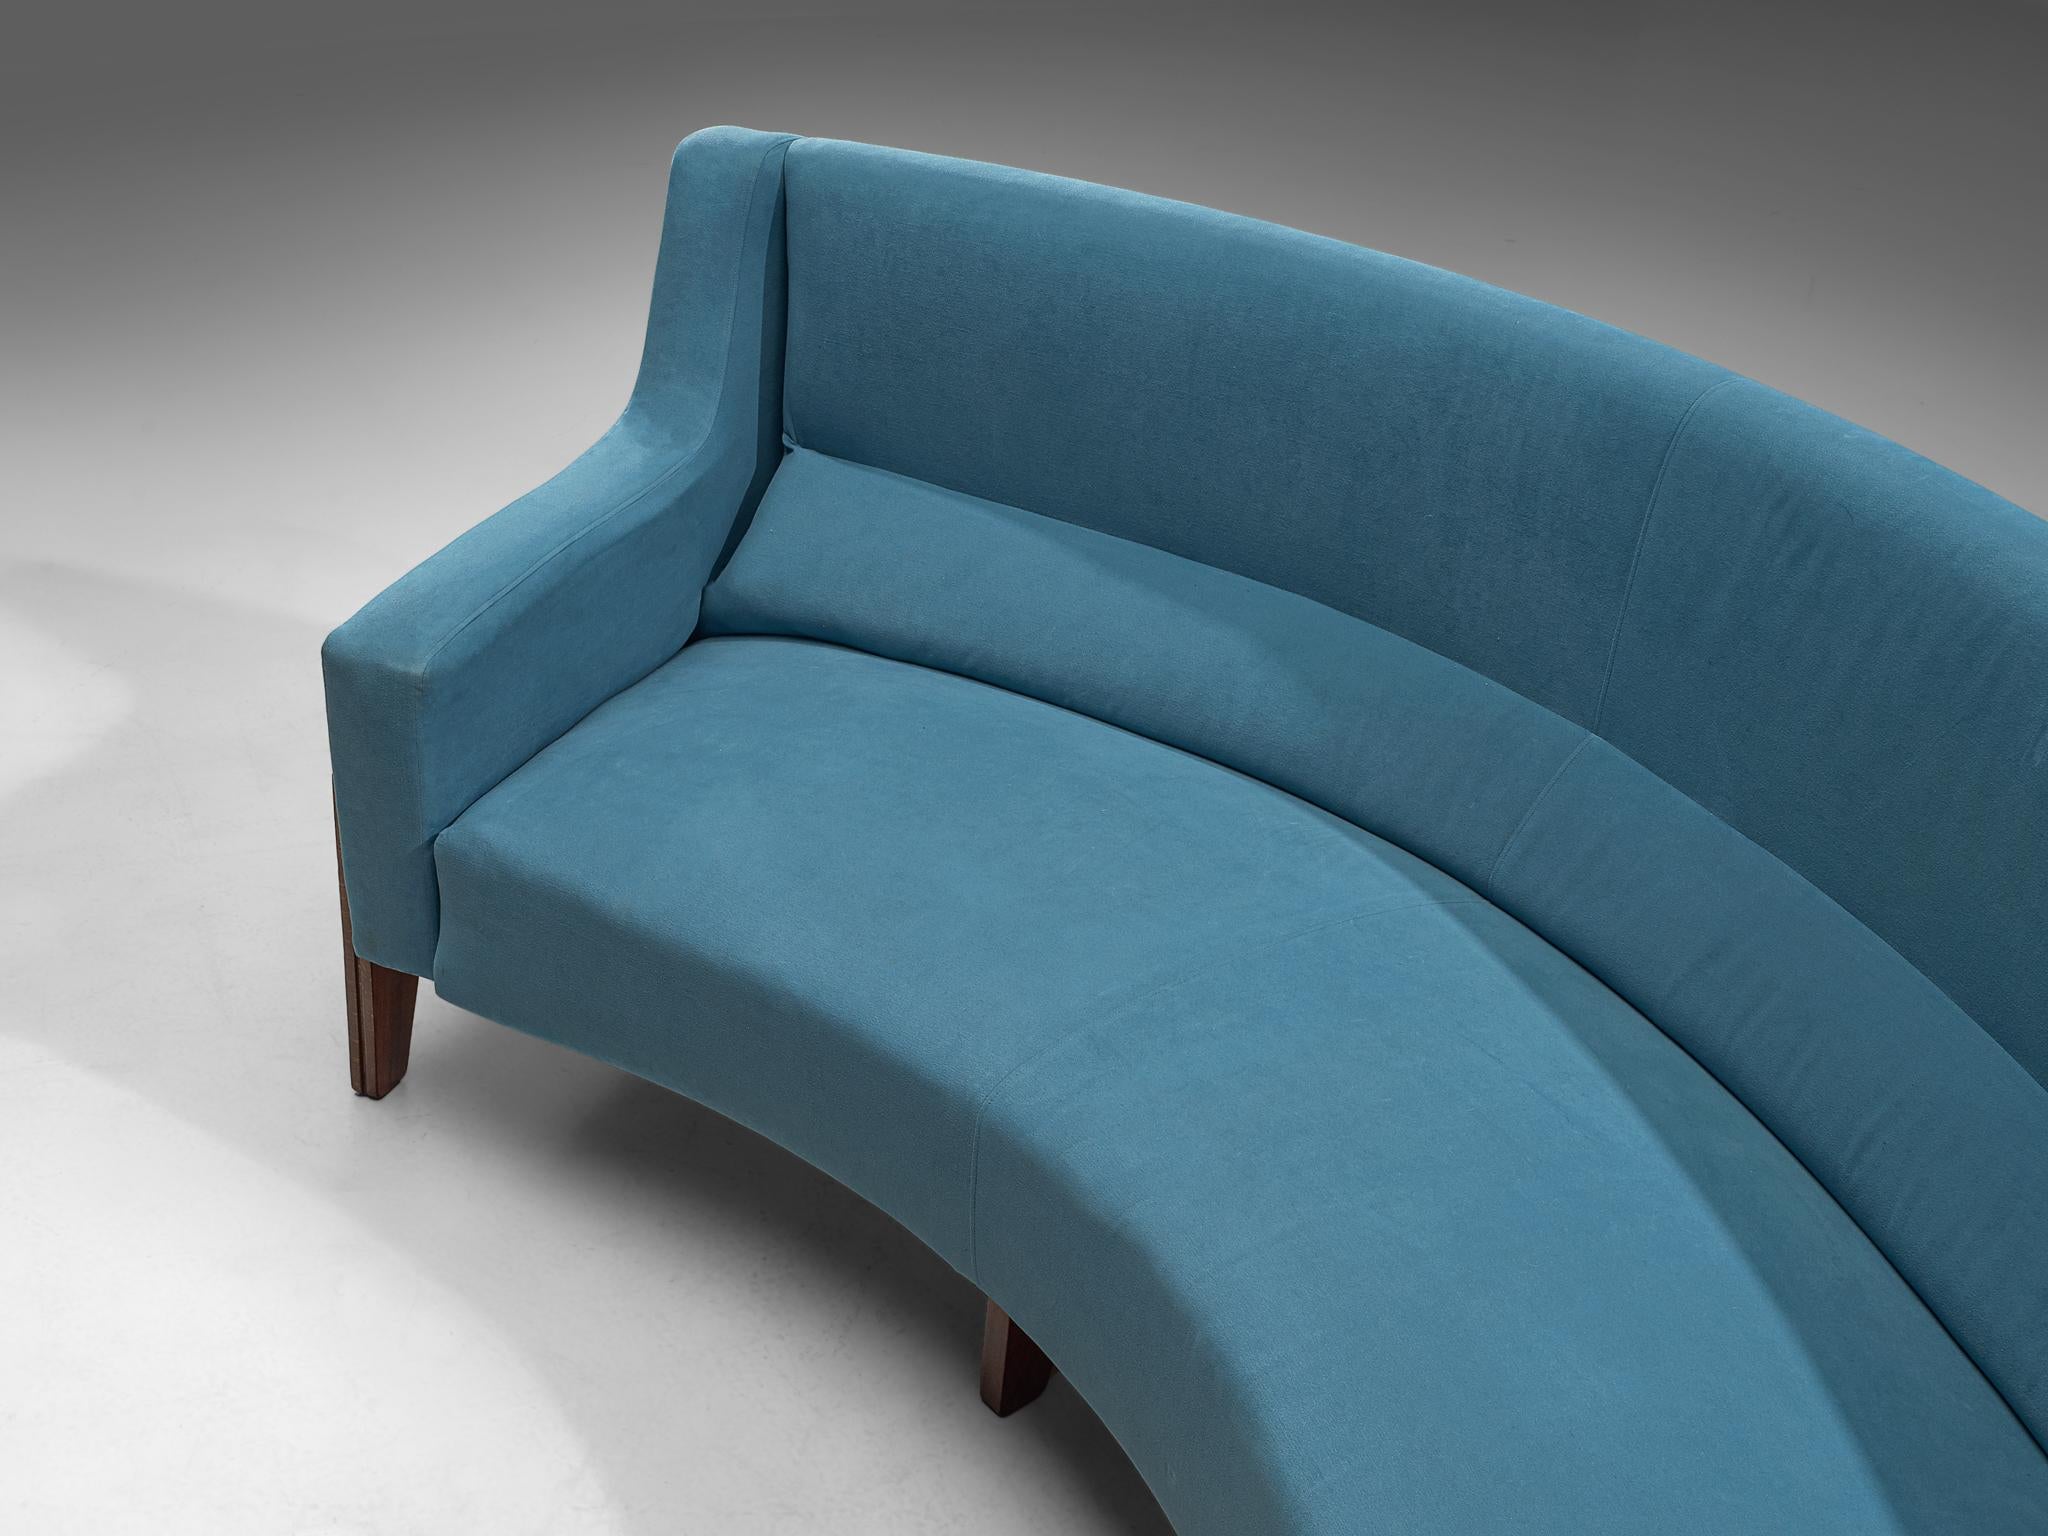 Mid-20th Century Italian Curved Sofa in Rosewood and Sky Blue Upholstery